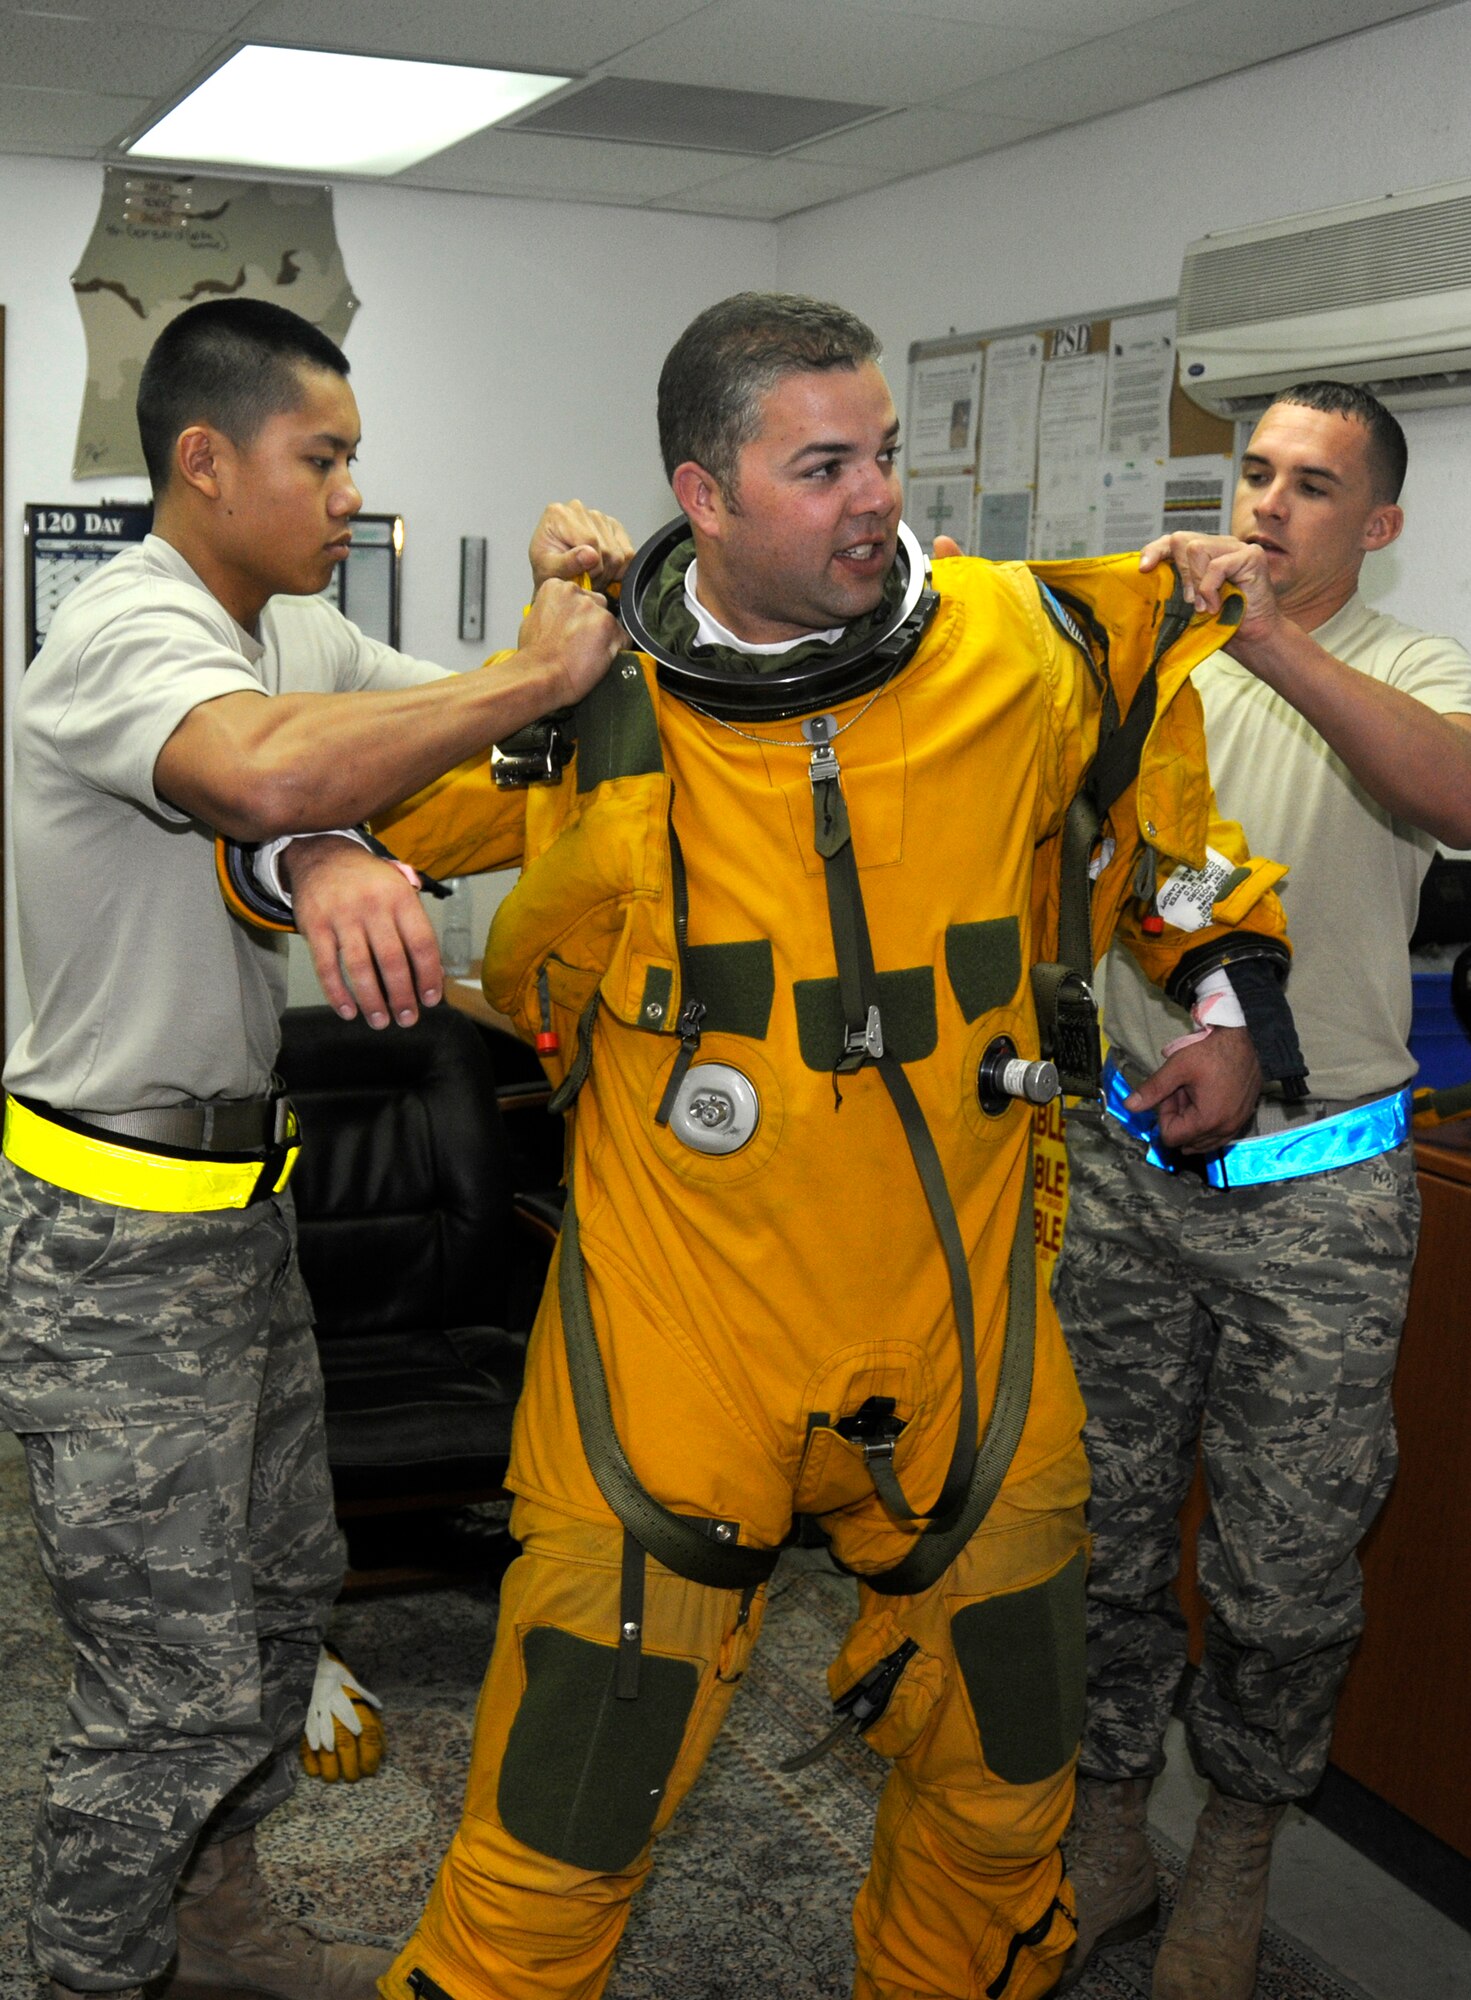 SOUTHWEST ASIA -- Lt. Col. Brian "Bubba" Dickinson gets help from Senior Airman David Sivixay(left) and Senior Airman Allen Smith putting on a full pressure suit here Nov. 14. Both are with the 99th Expeditionary Reconnaissance Squadron Physiological Support Division. Col. Dickinson is a U-2 Dragonlady pilot with the 99th ERS and is responsible for gathering intelligence in the area of responsibility in support of Operation Iraqi and Enduring Freedom. All three are deployed from the 9th Reconnaissance Wing out of Beale Air Force Base, Calif. Airman Sivixay is from San Diego, Calif. Airman Smith's hometown is Tampa, Fla. and Colonel Dickinson is a native of Oscoda, Mich., and Colorado Springs, Colo.(U.S. Air Force photo/Tech. Sgt. Christopher A. Campbell)(released)